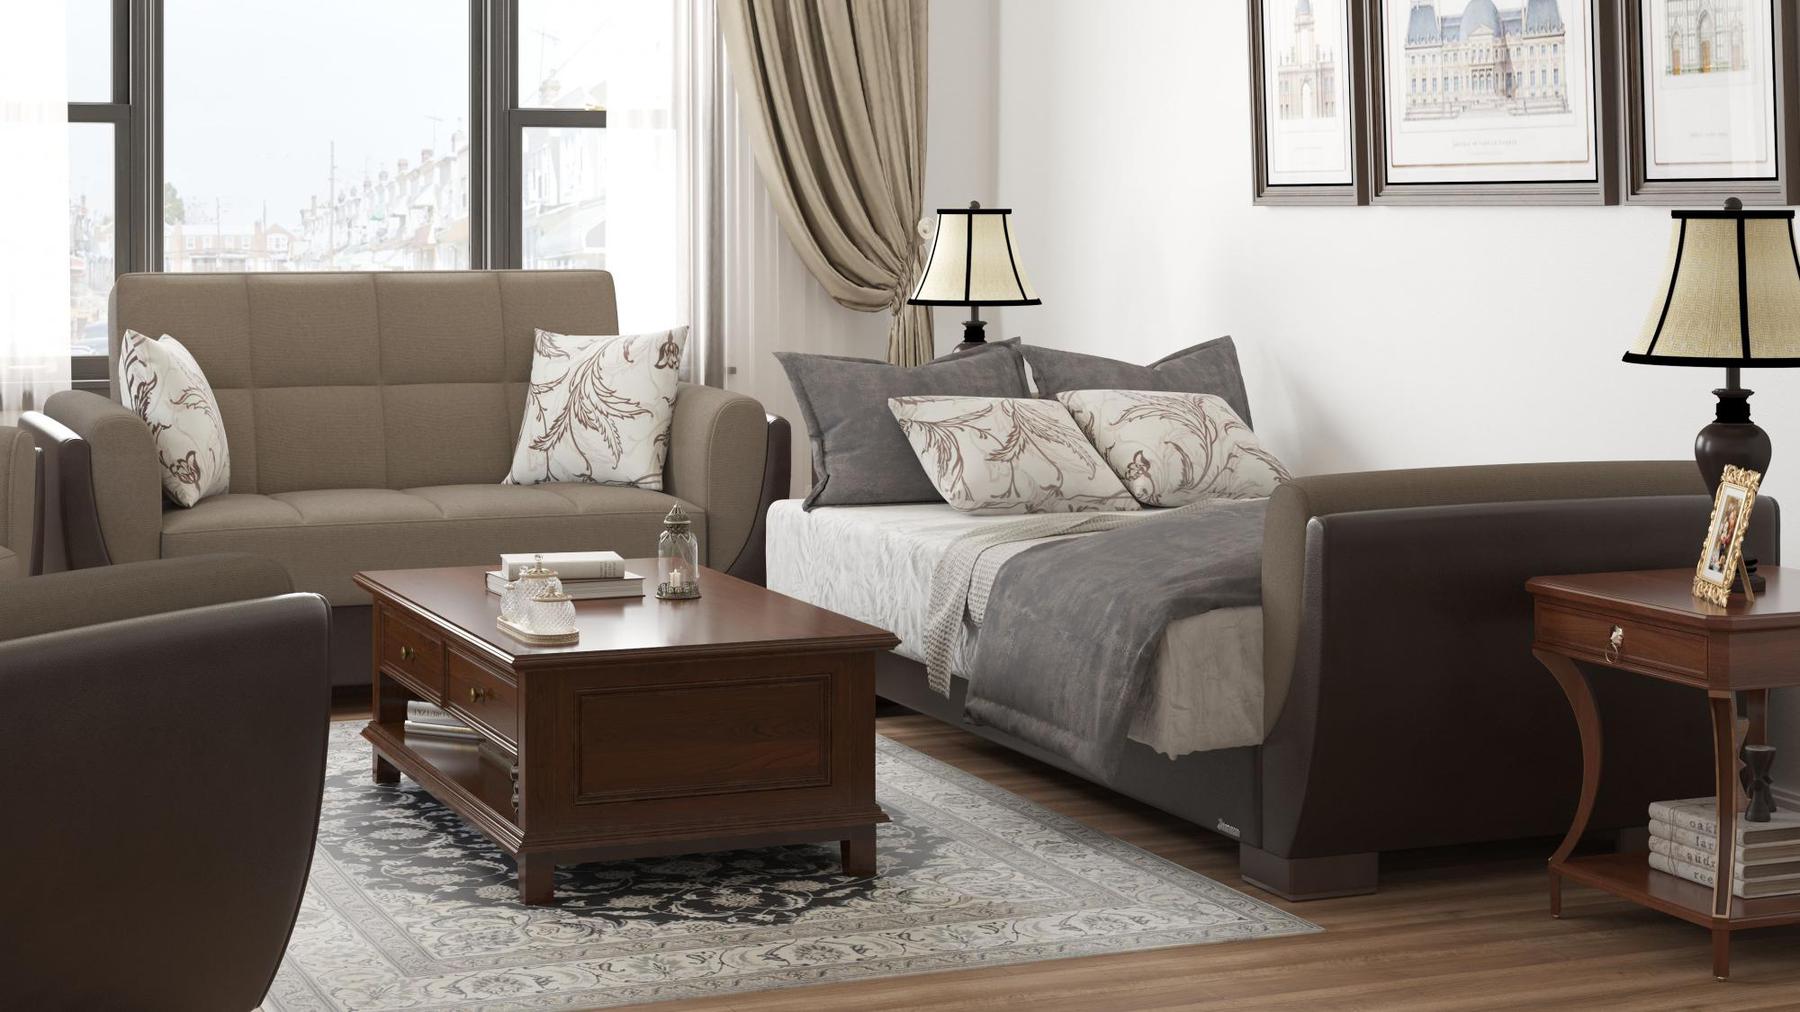 Modern design, Light Taupe, Dark Brown , Chenille, Artificial Leather  upholstered convertible sleeper Loveseat with underseat storage from Voyage Shelter by Ottomanson in living room lifestyle setting converted to sleeper. This Loveseat measures 71 inches width by 36 inches depth by 41 inches height.